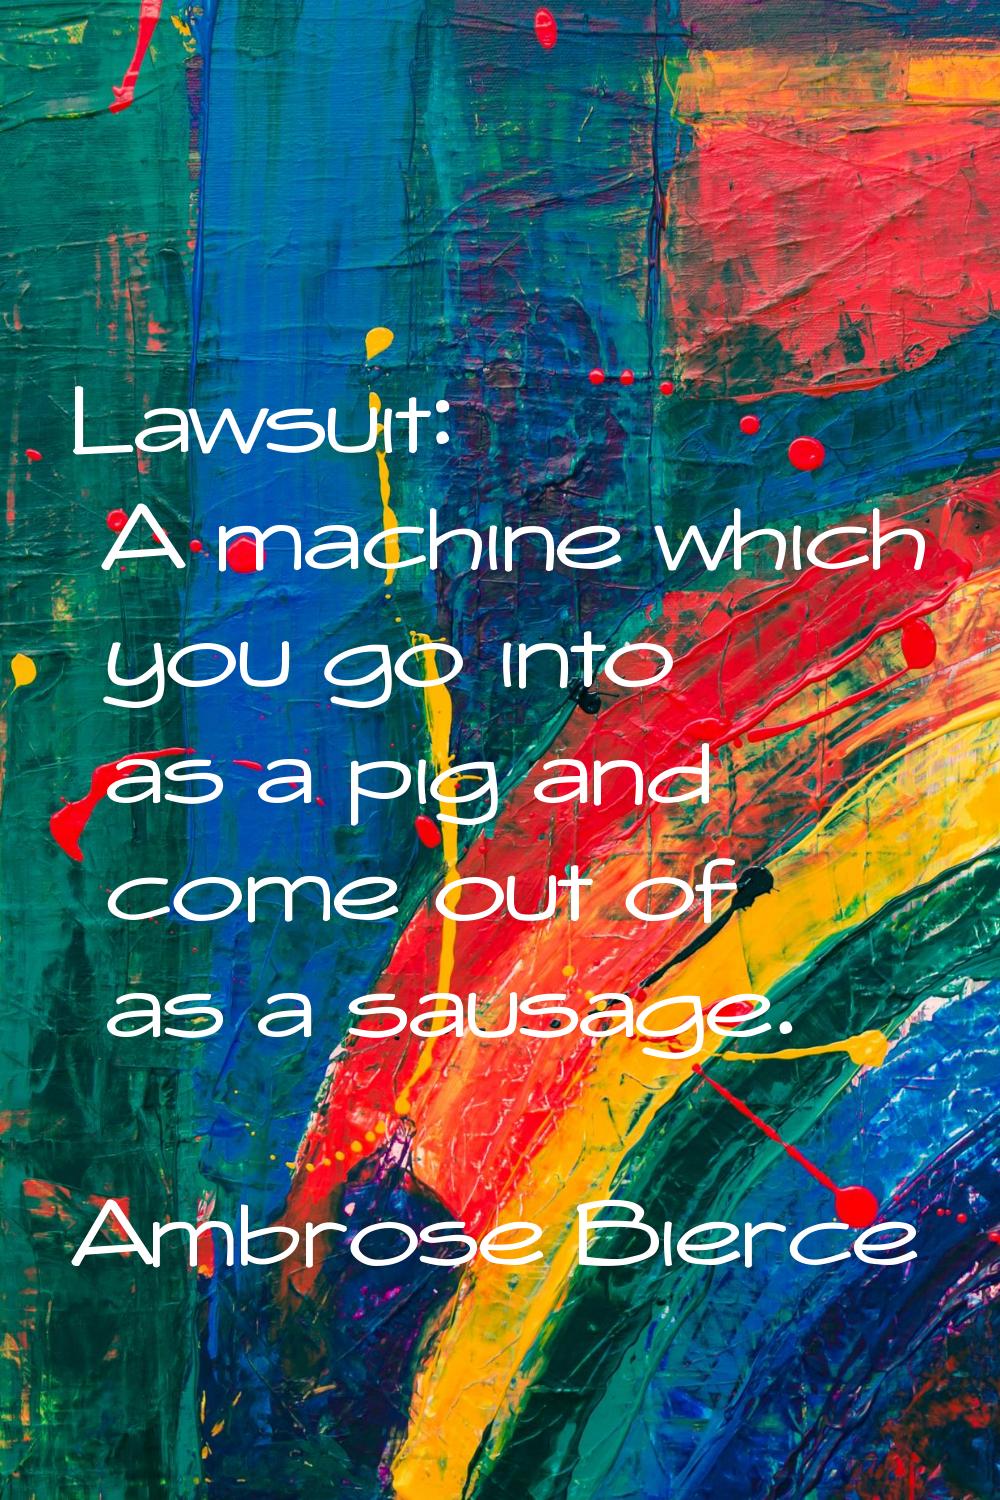 Lawsuit: A machine which you go into as a pig and come out of as a sausage.